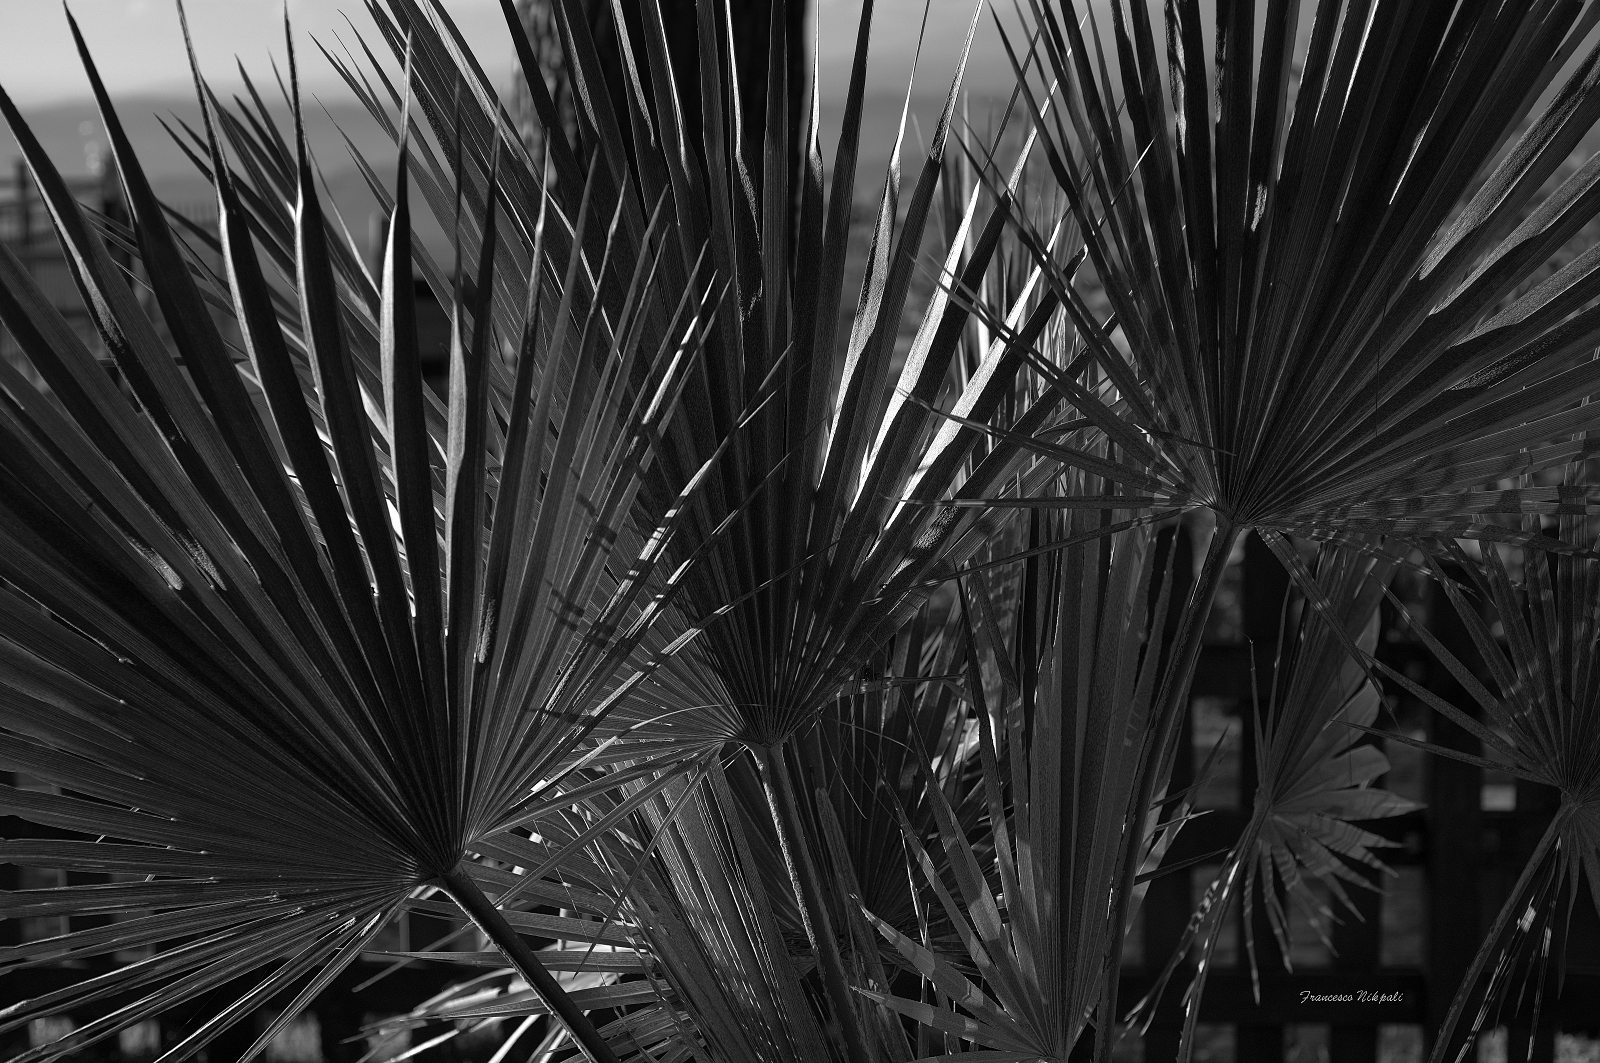 A palm from the palms...